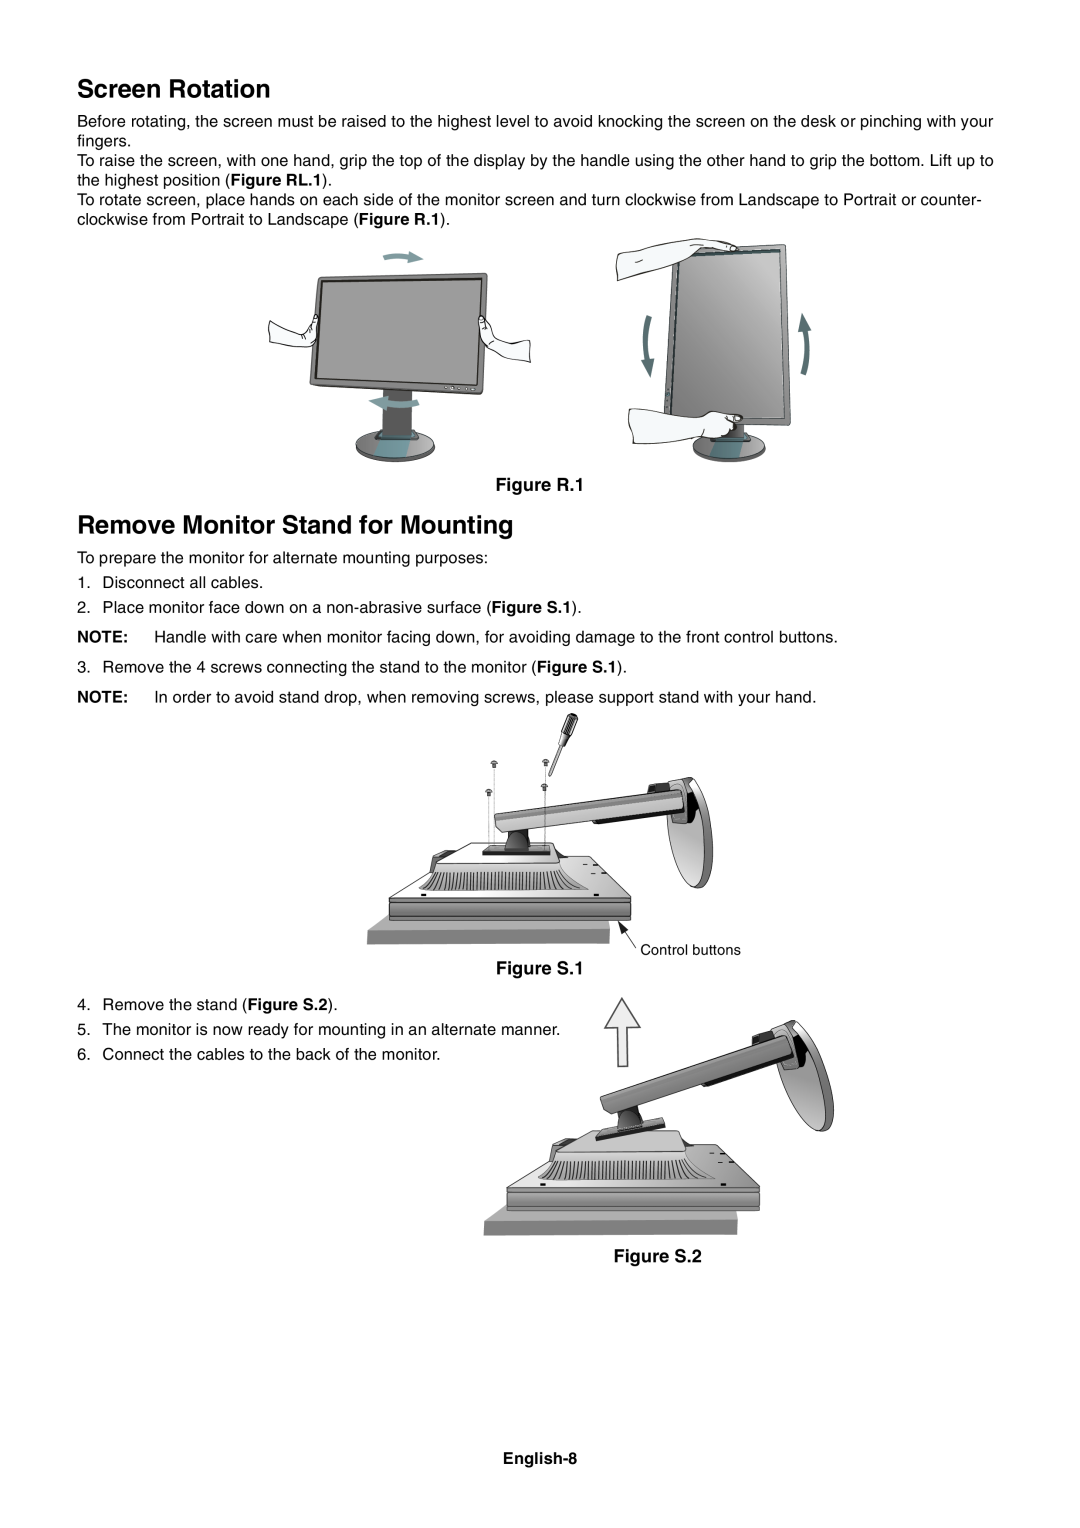 NEC L227HR user manual Screen Rotation, Remove Monitor Stand for Mounting, Figure R.1, Figure S.1, Figure S.2, English-8 